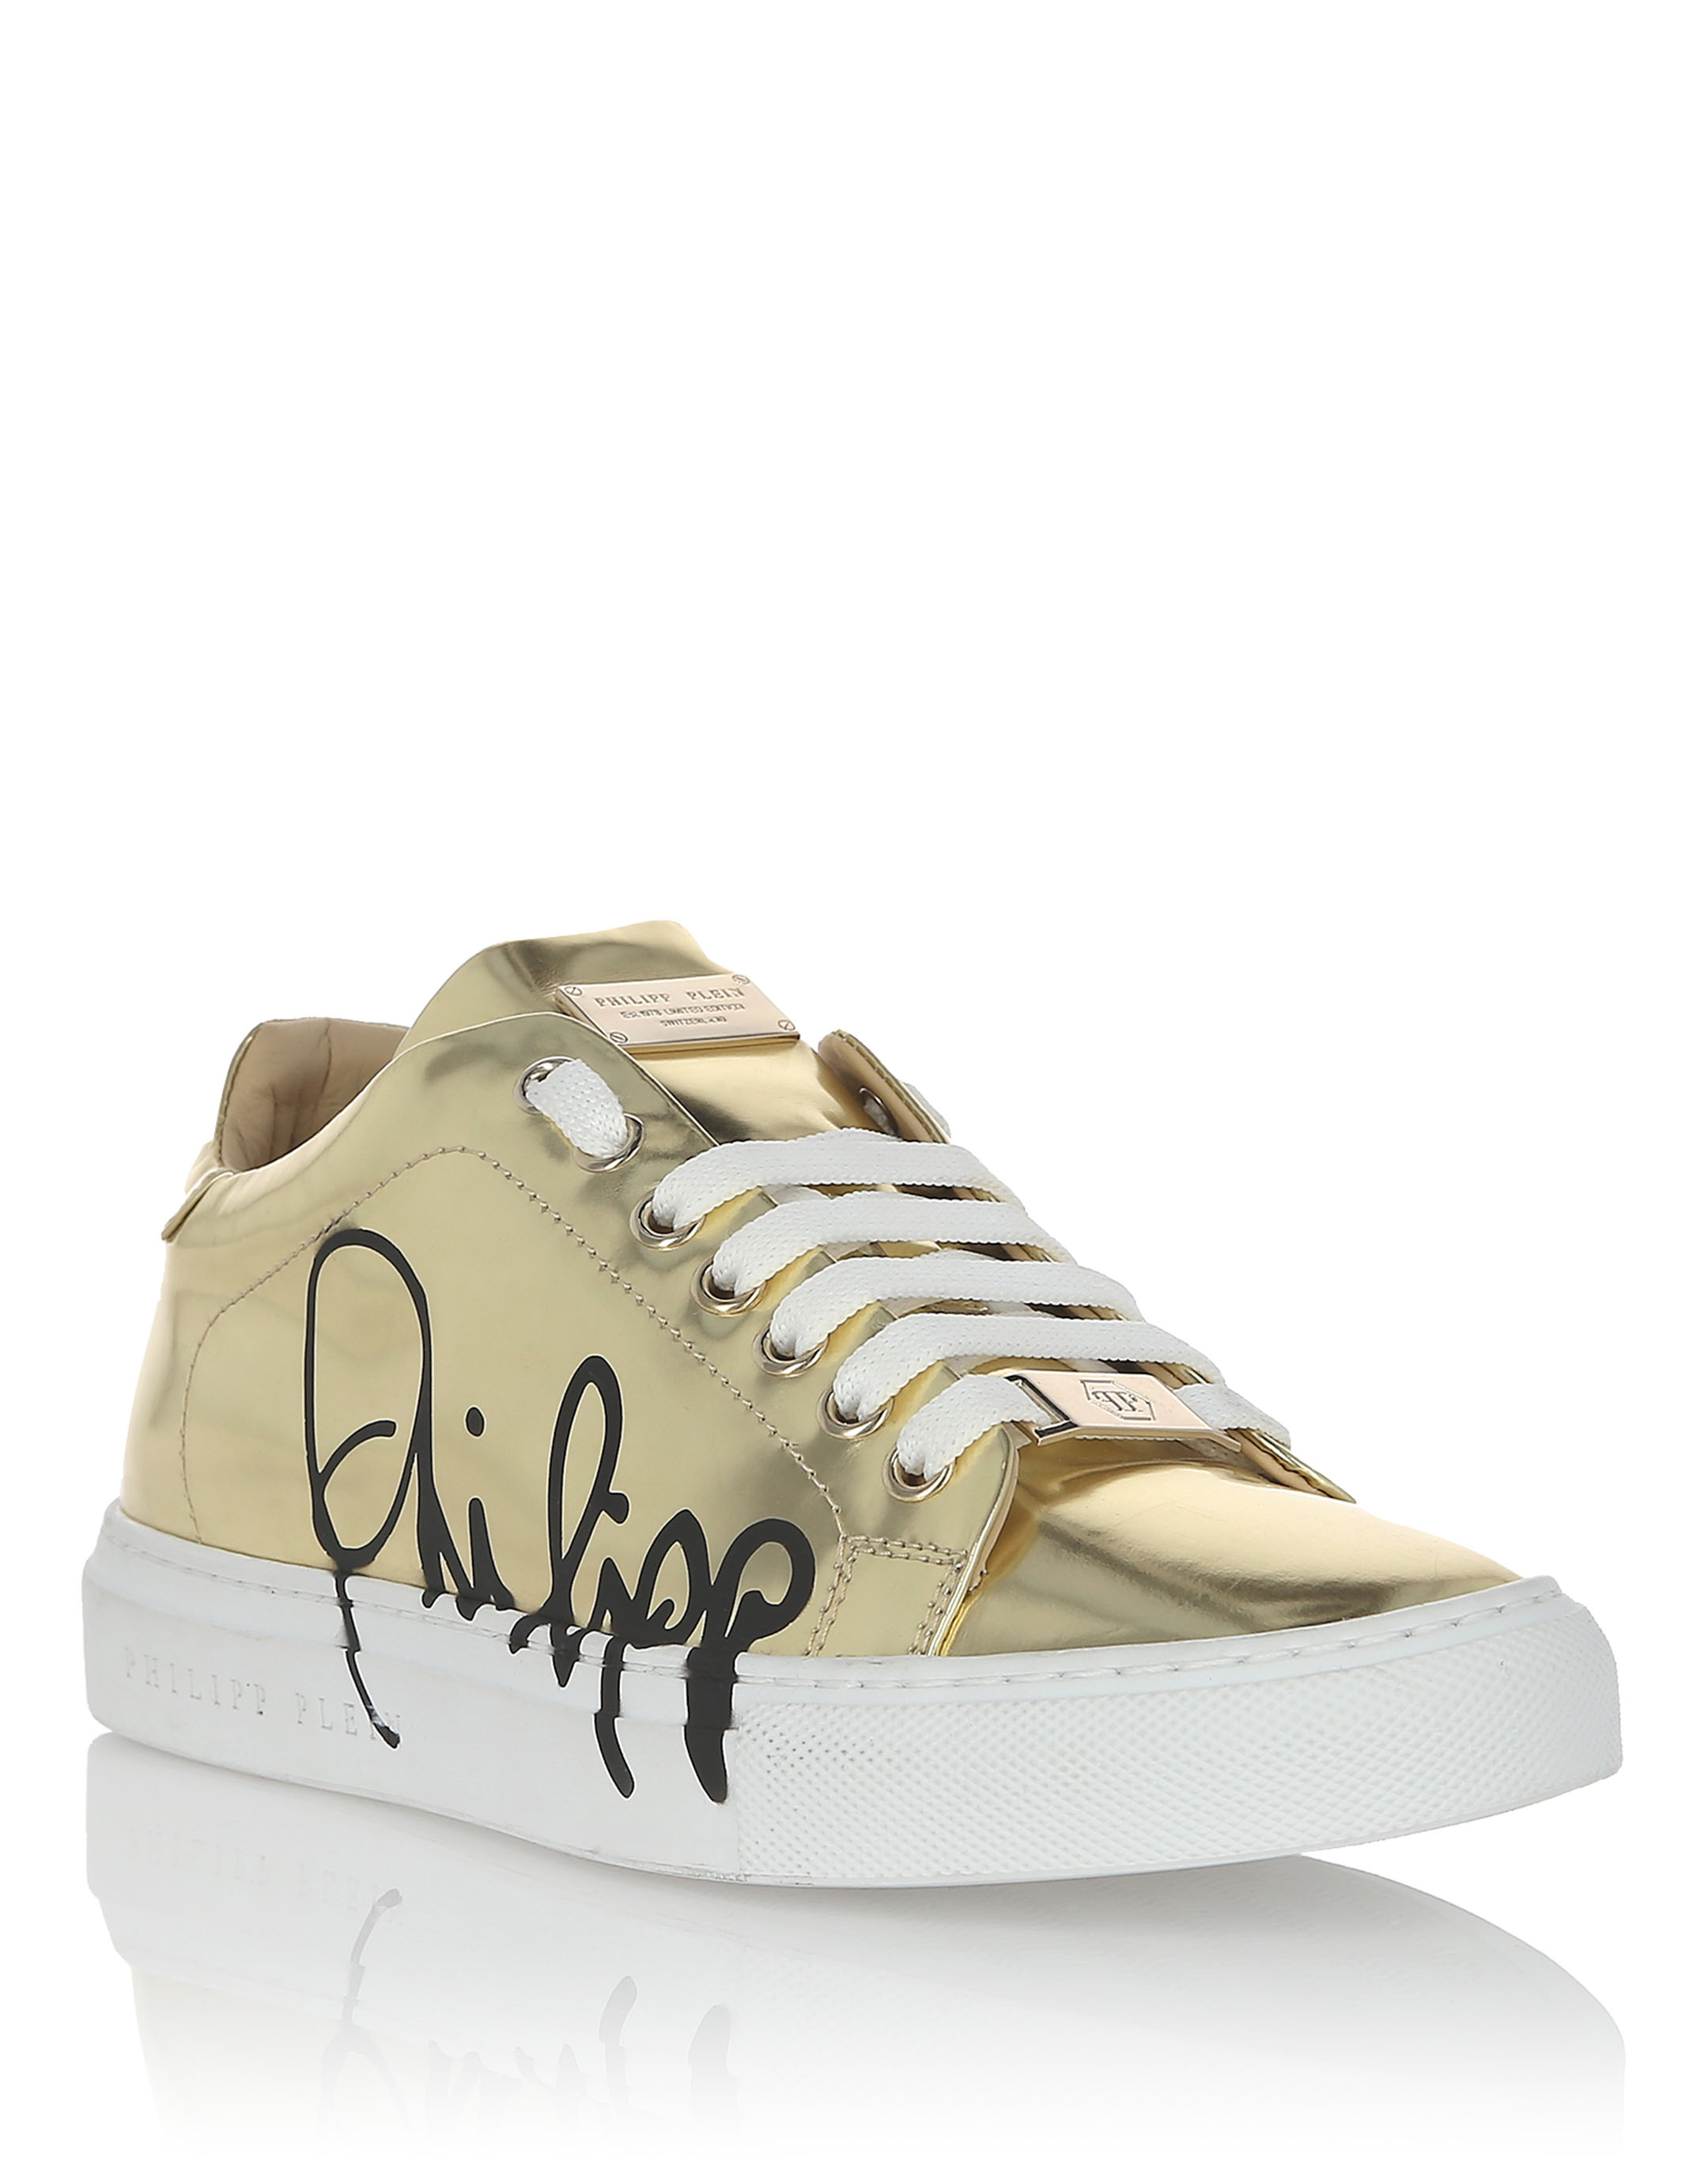 Lo-Top Sneakers "Signature mirror" | Philipp Plein Outlet